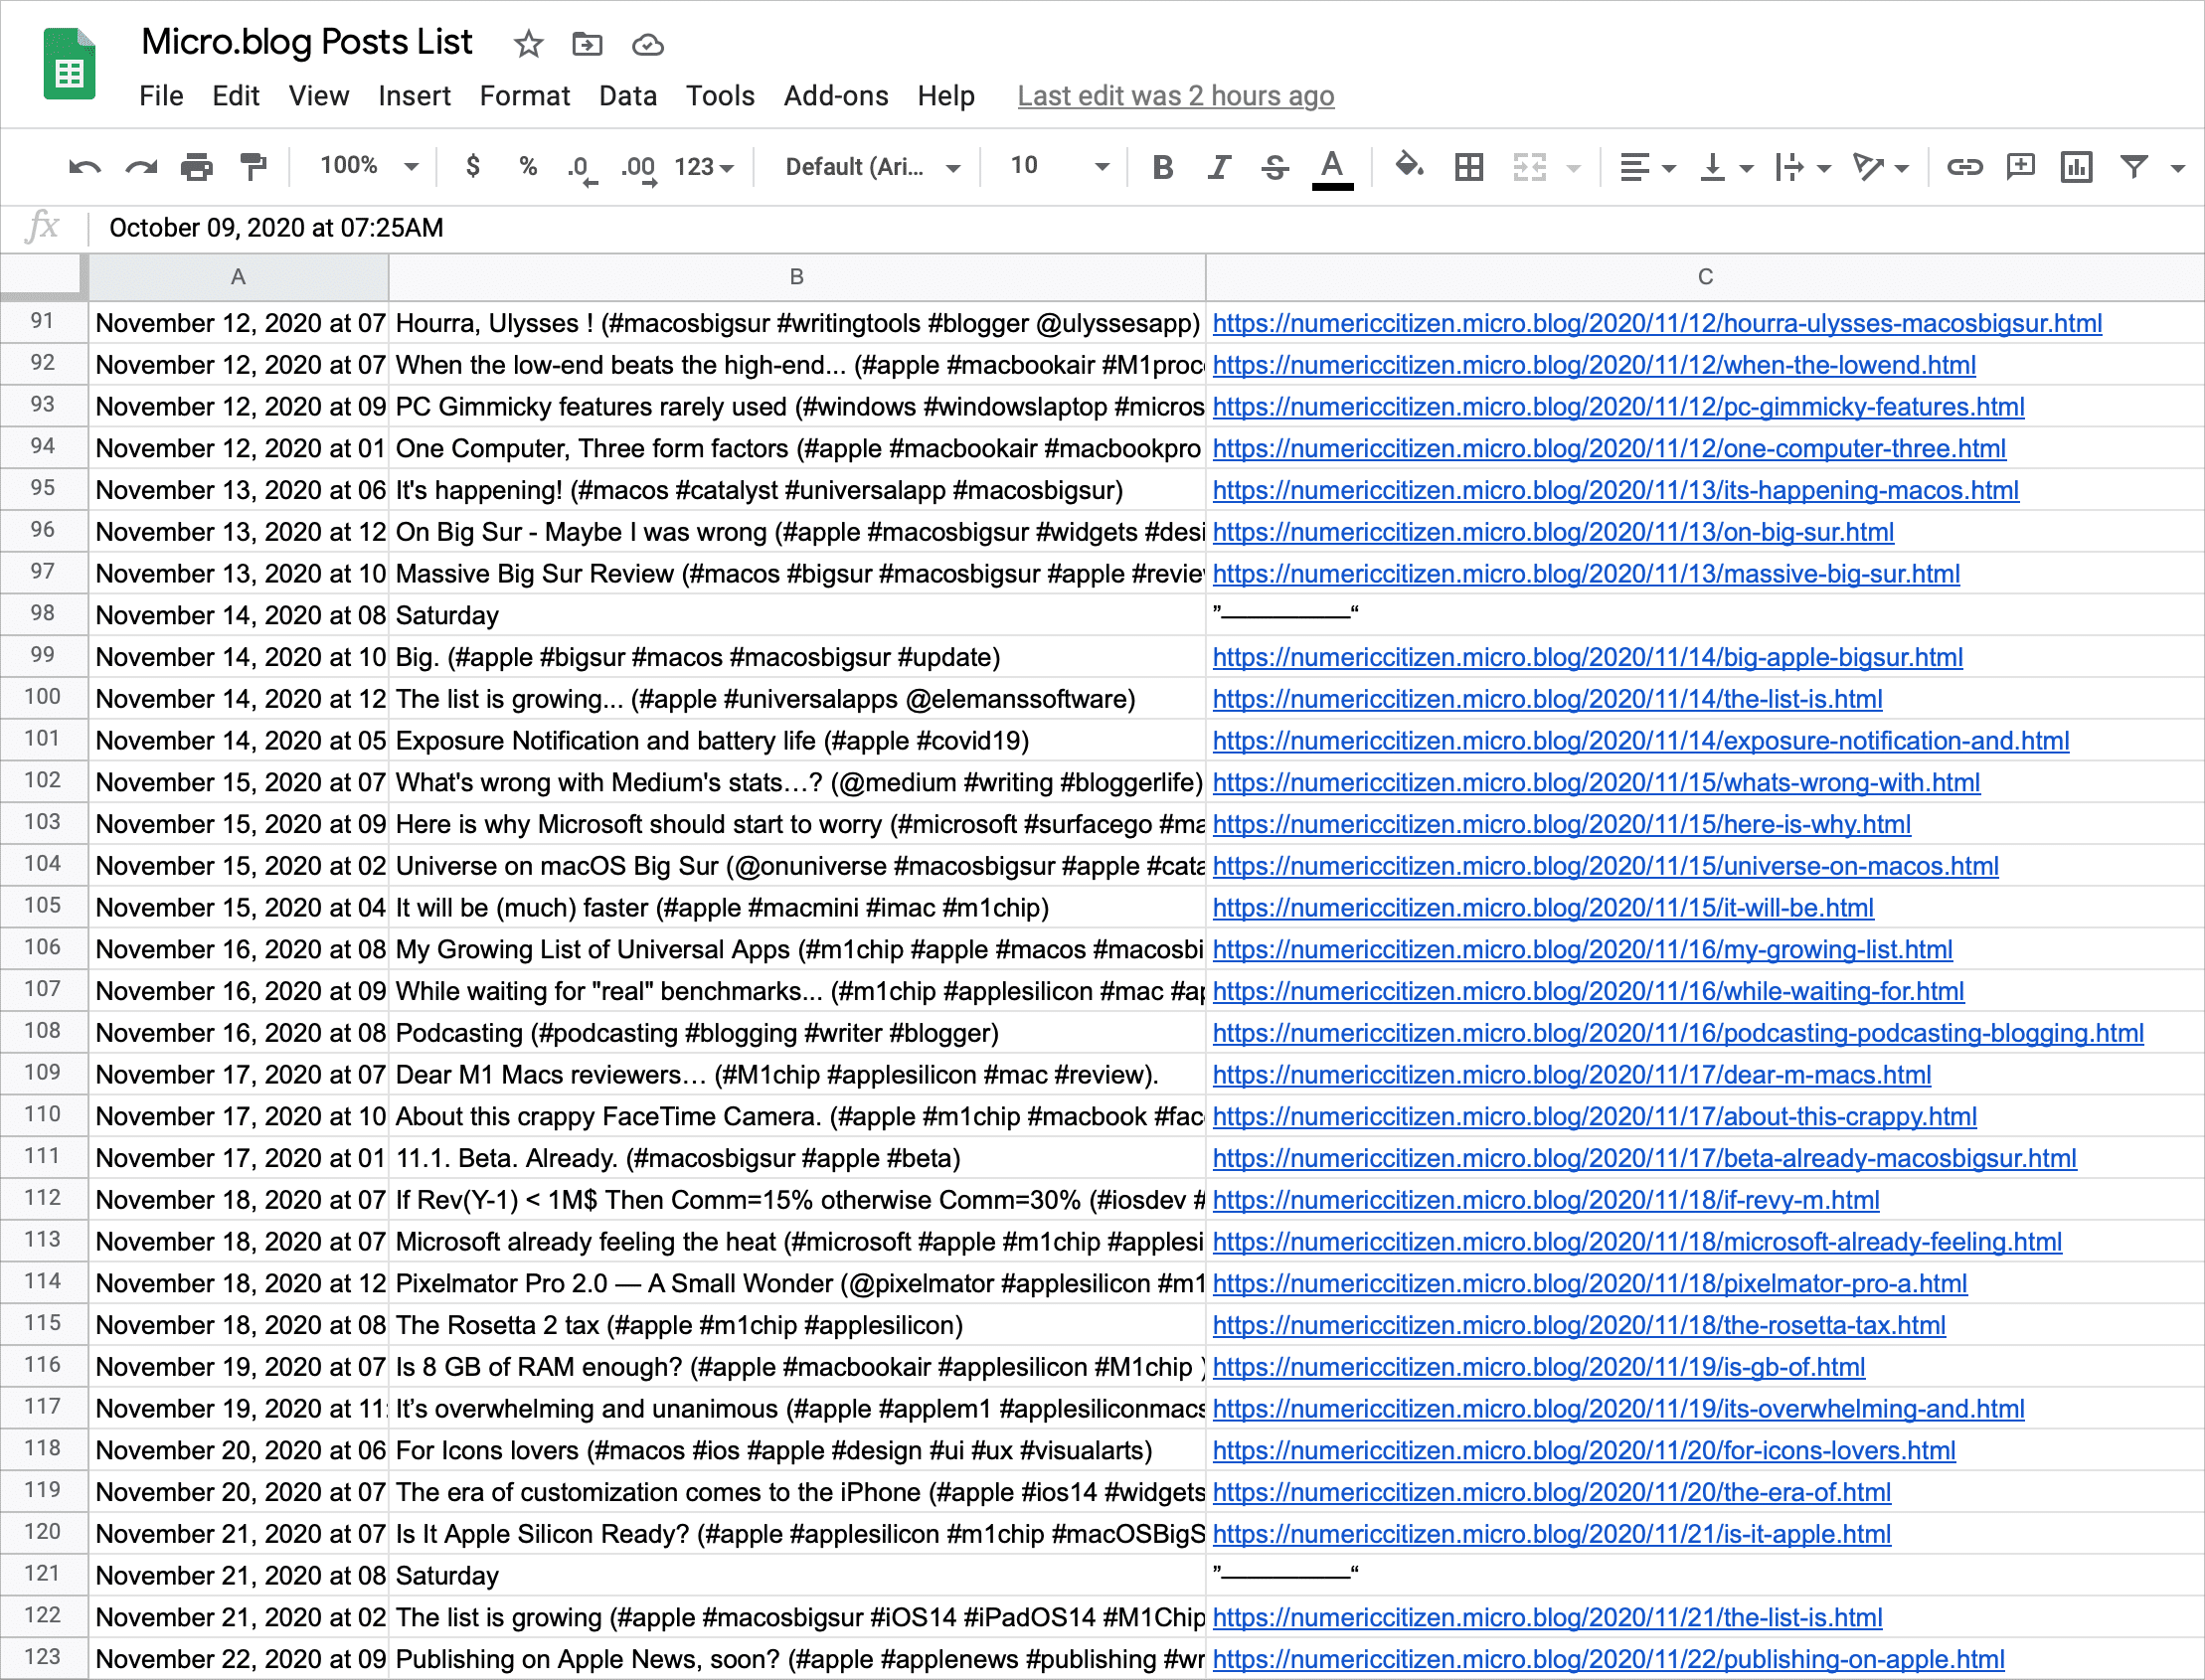 Archives of references to my Micro.blog posts.